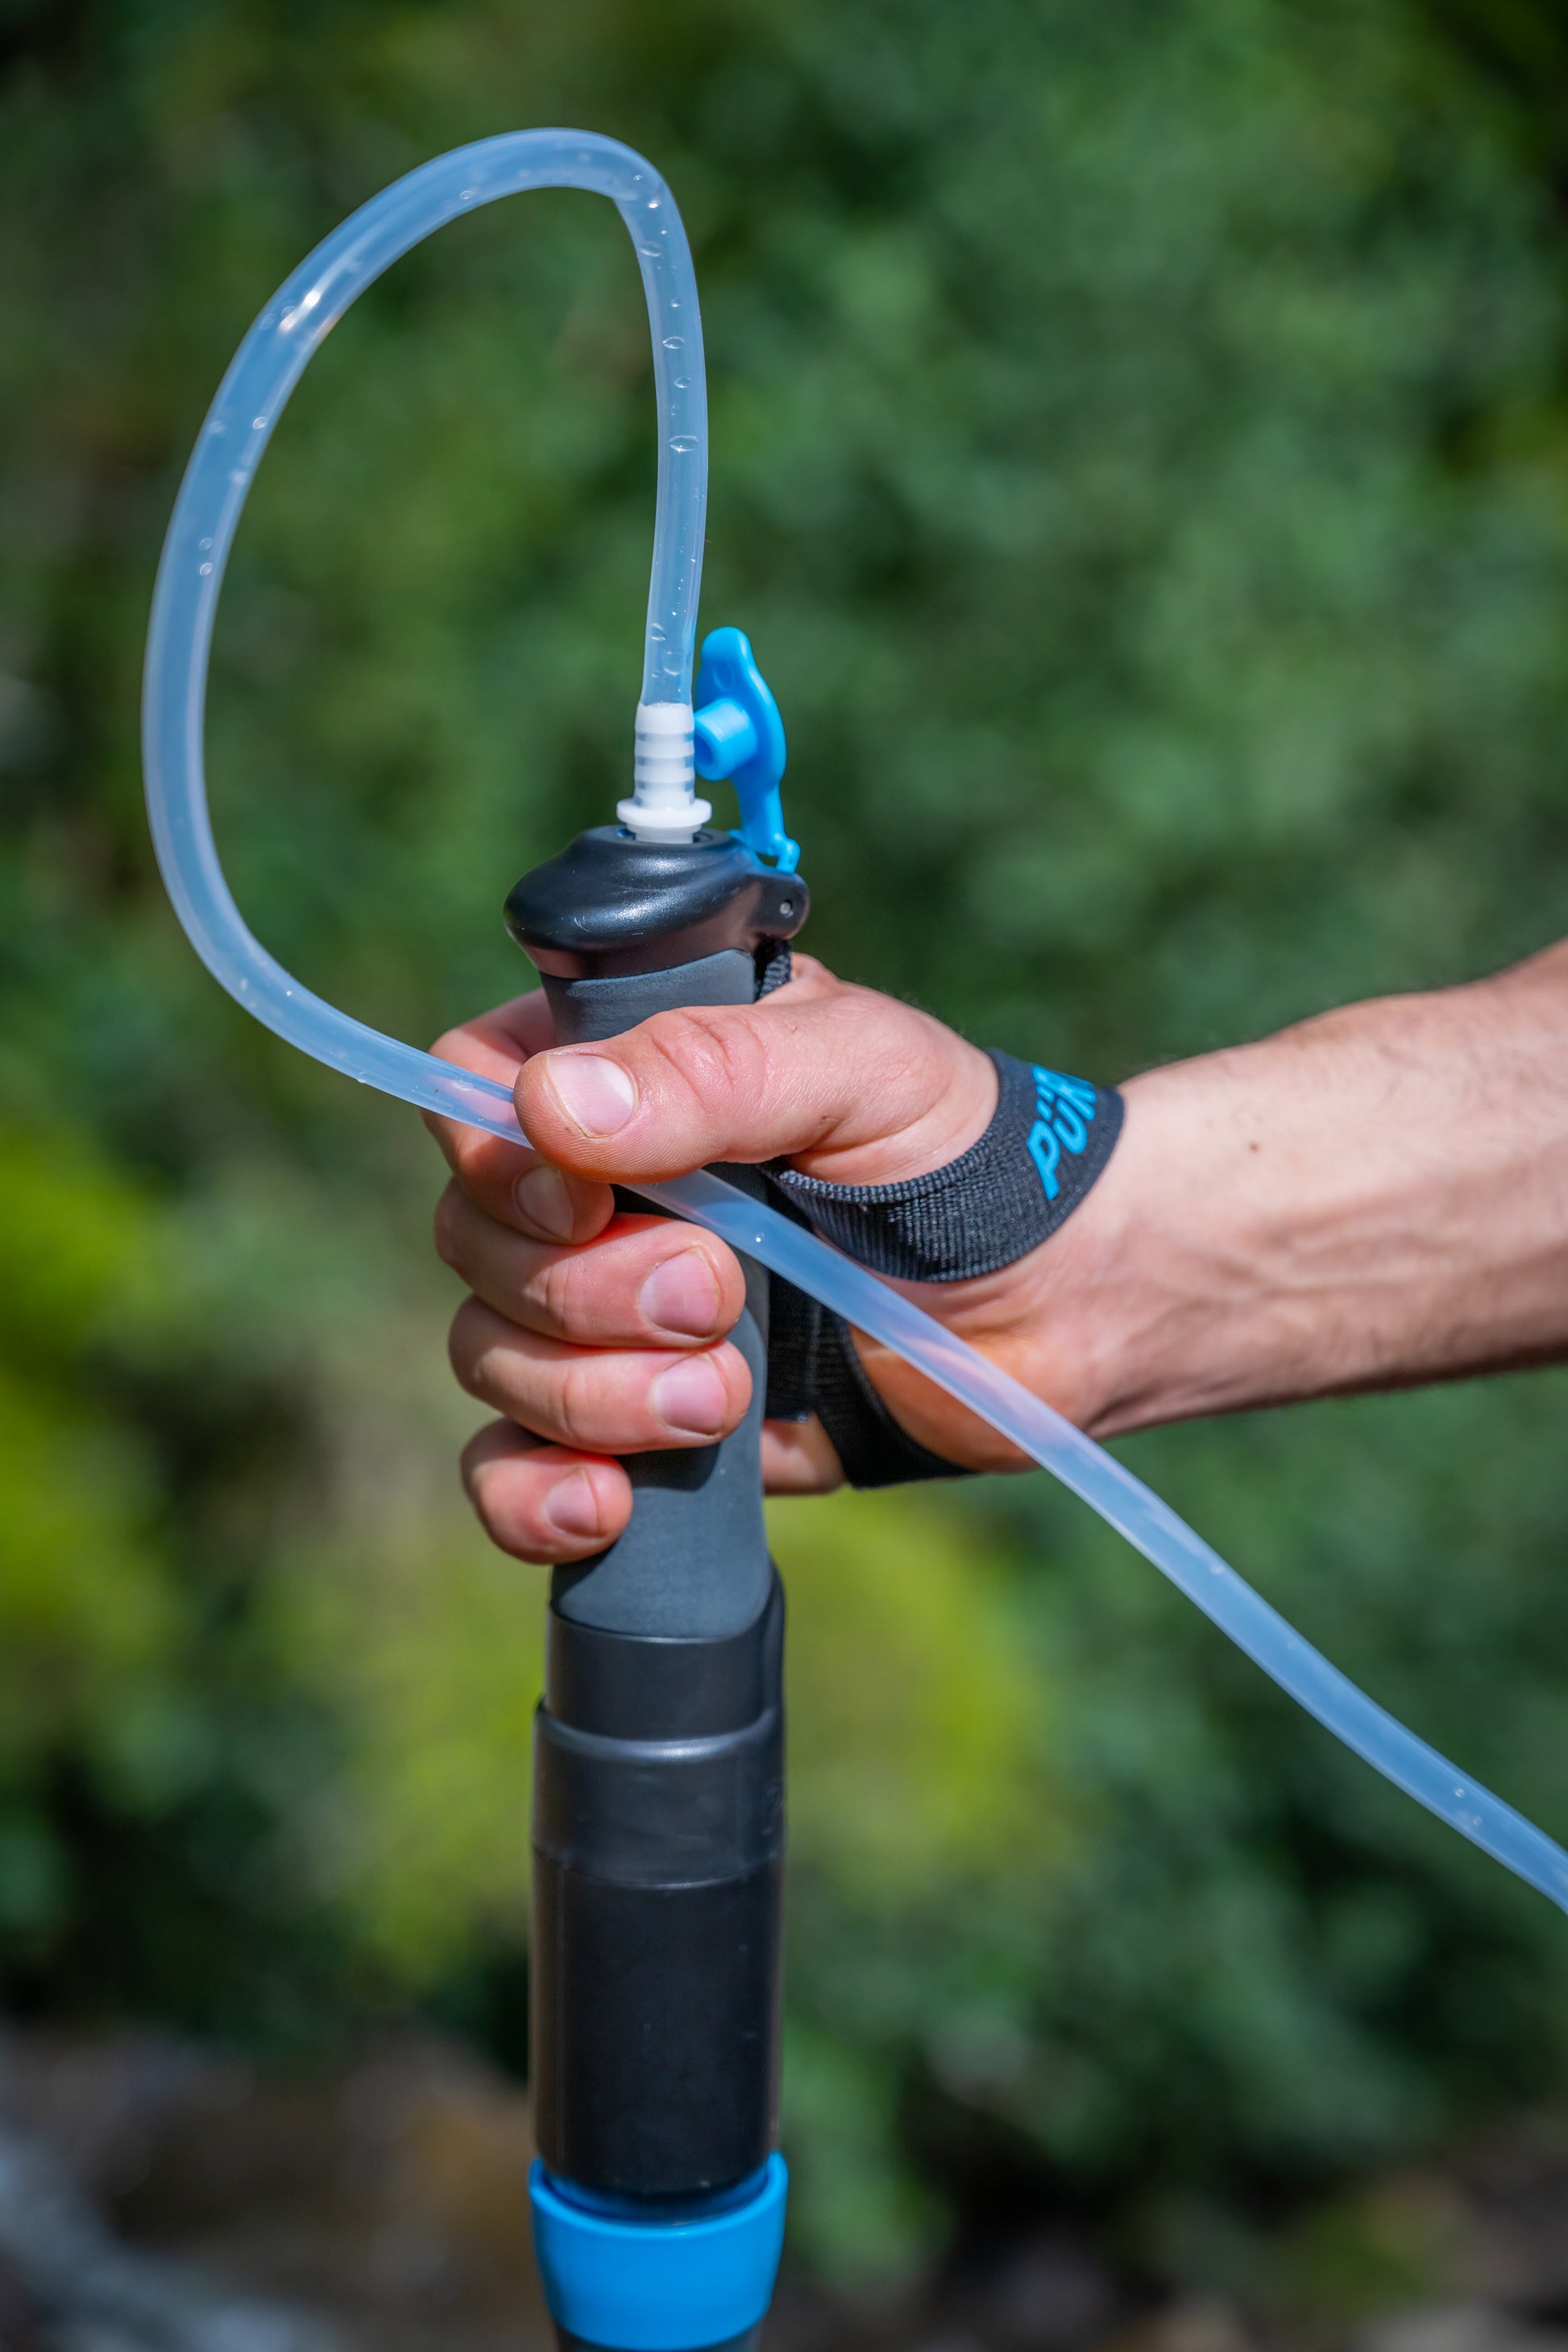 PurTrek ingeniously incorporates both filter and pump, right in the grip of the trekking pole